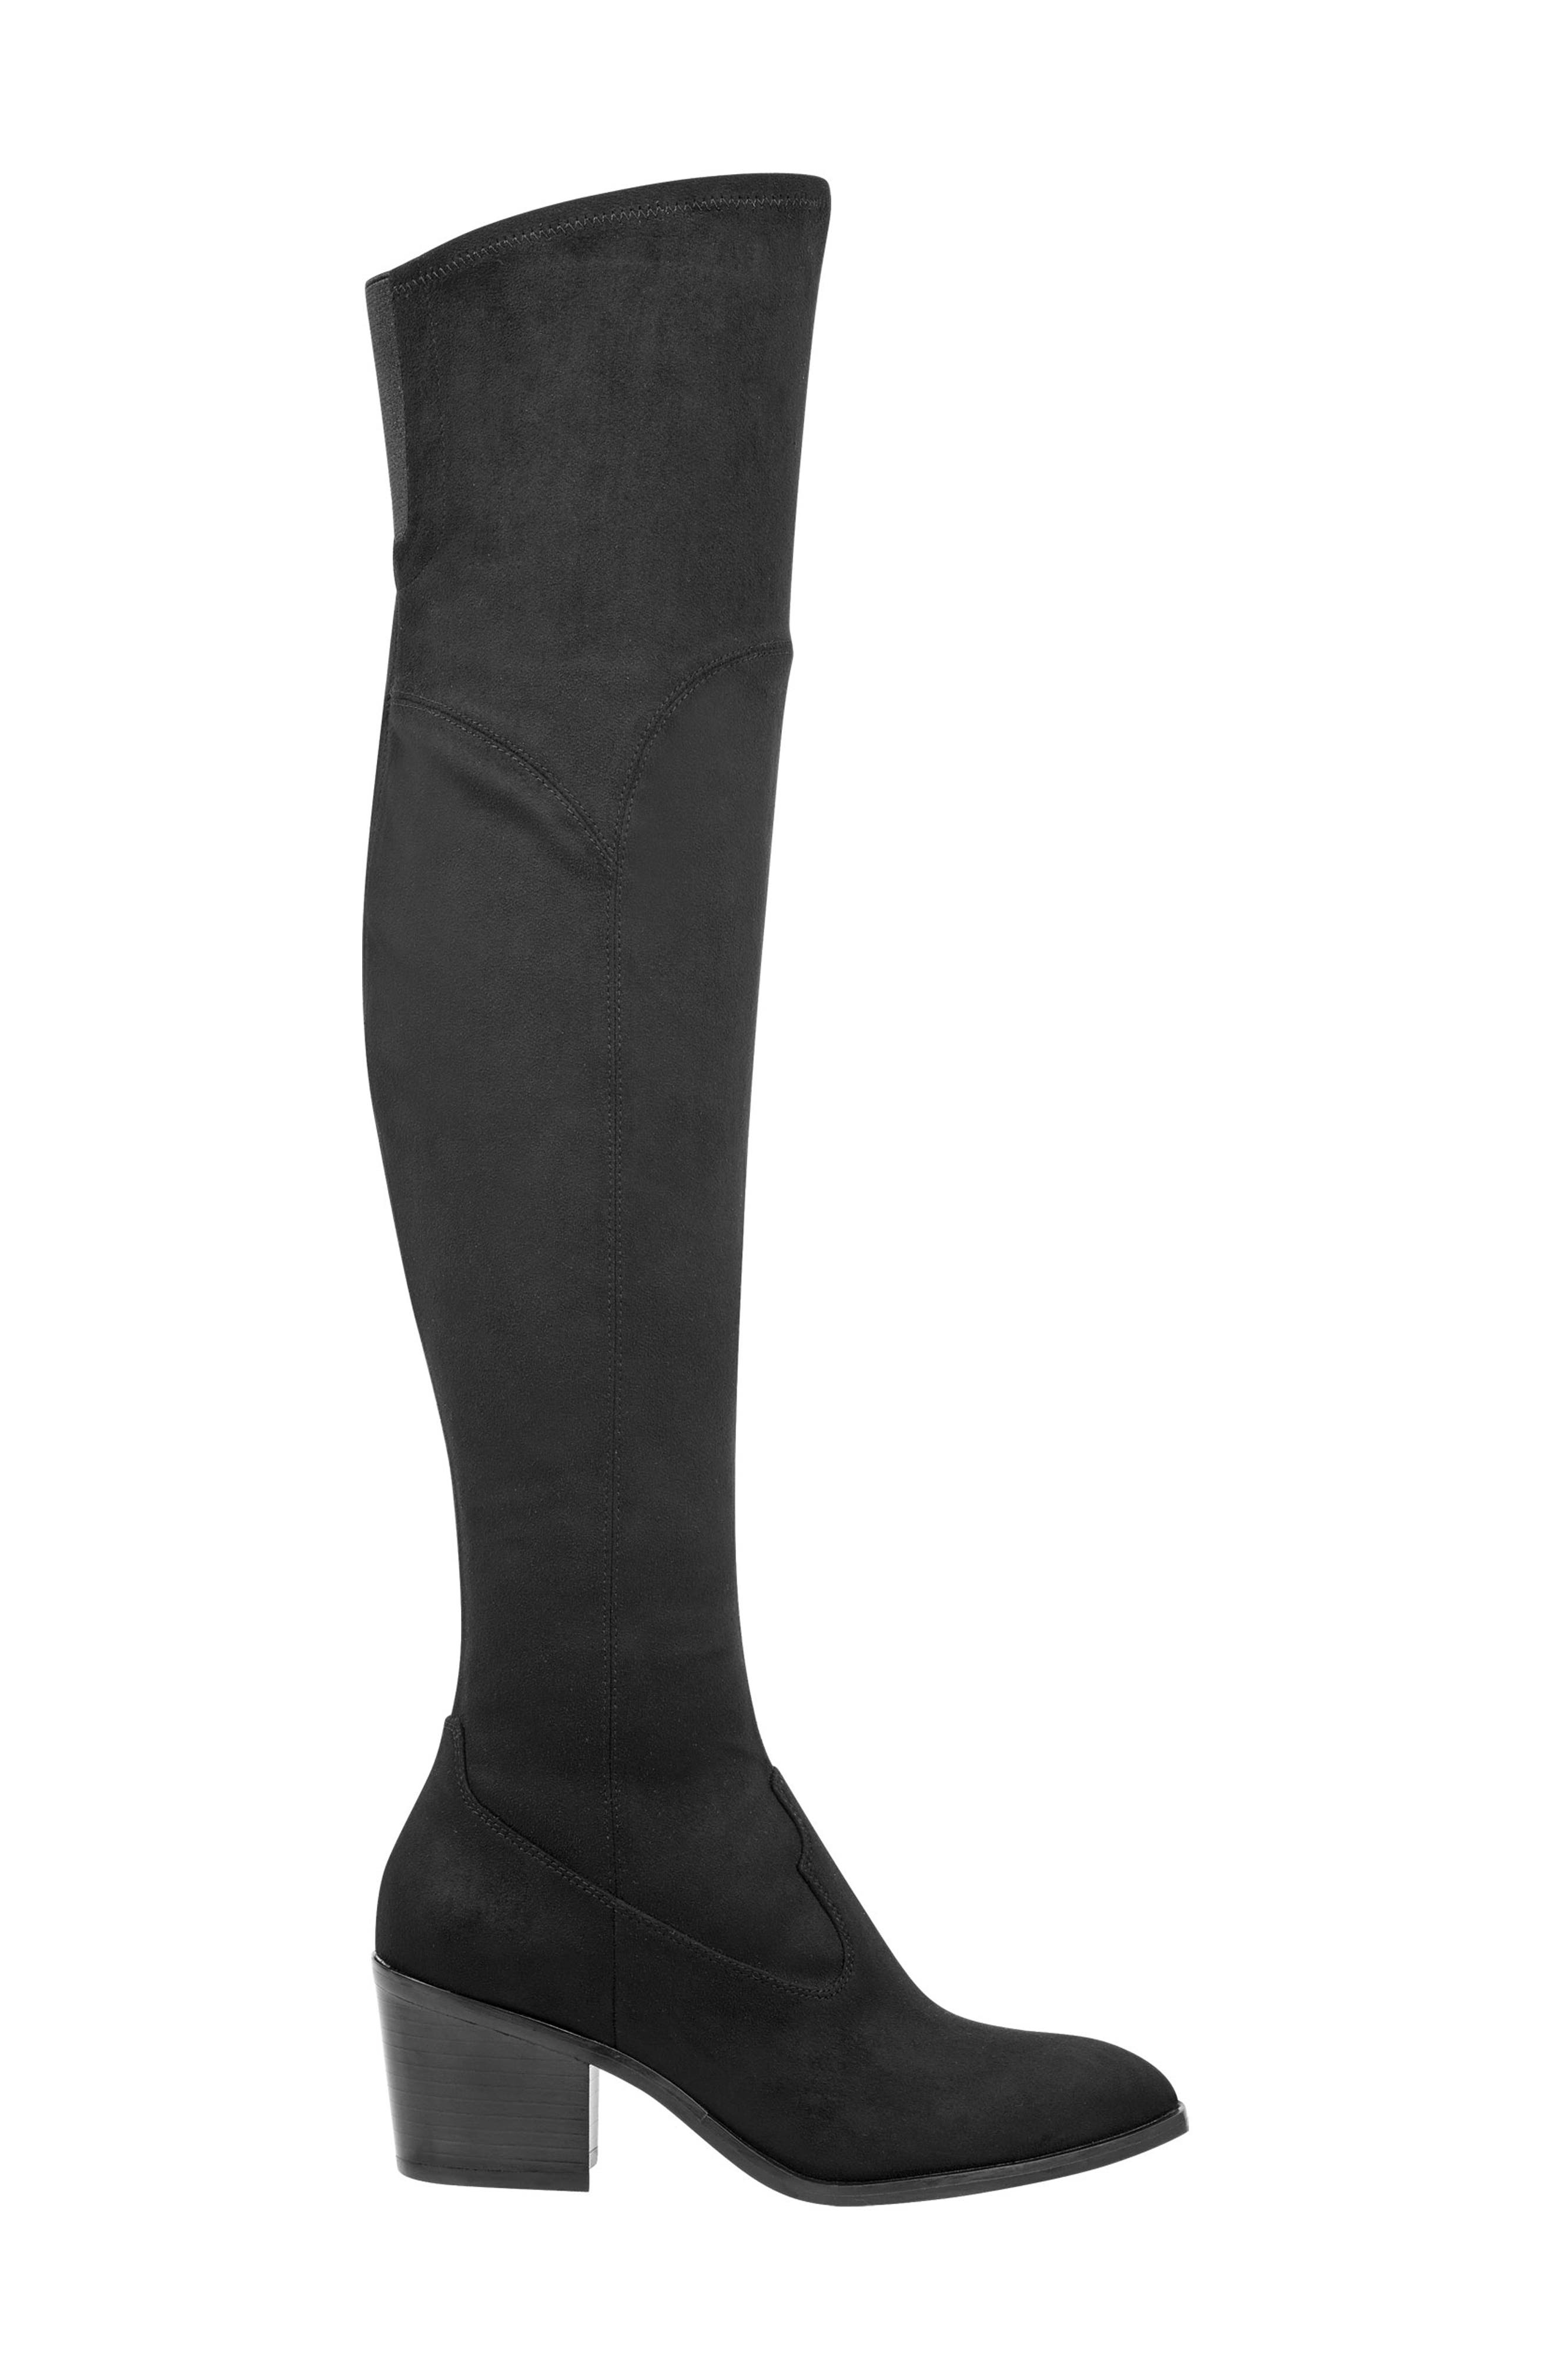 marc fisher ltd rossa over the knee boot